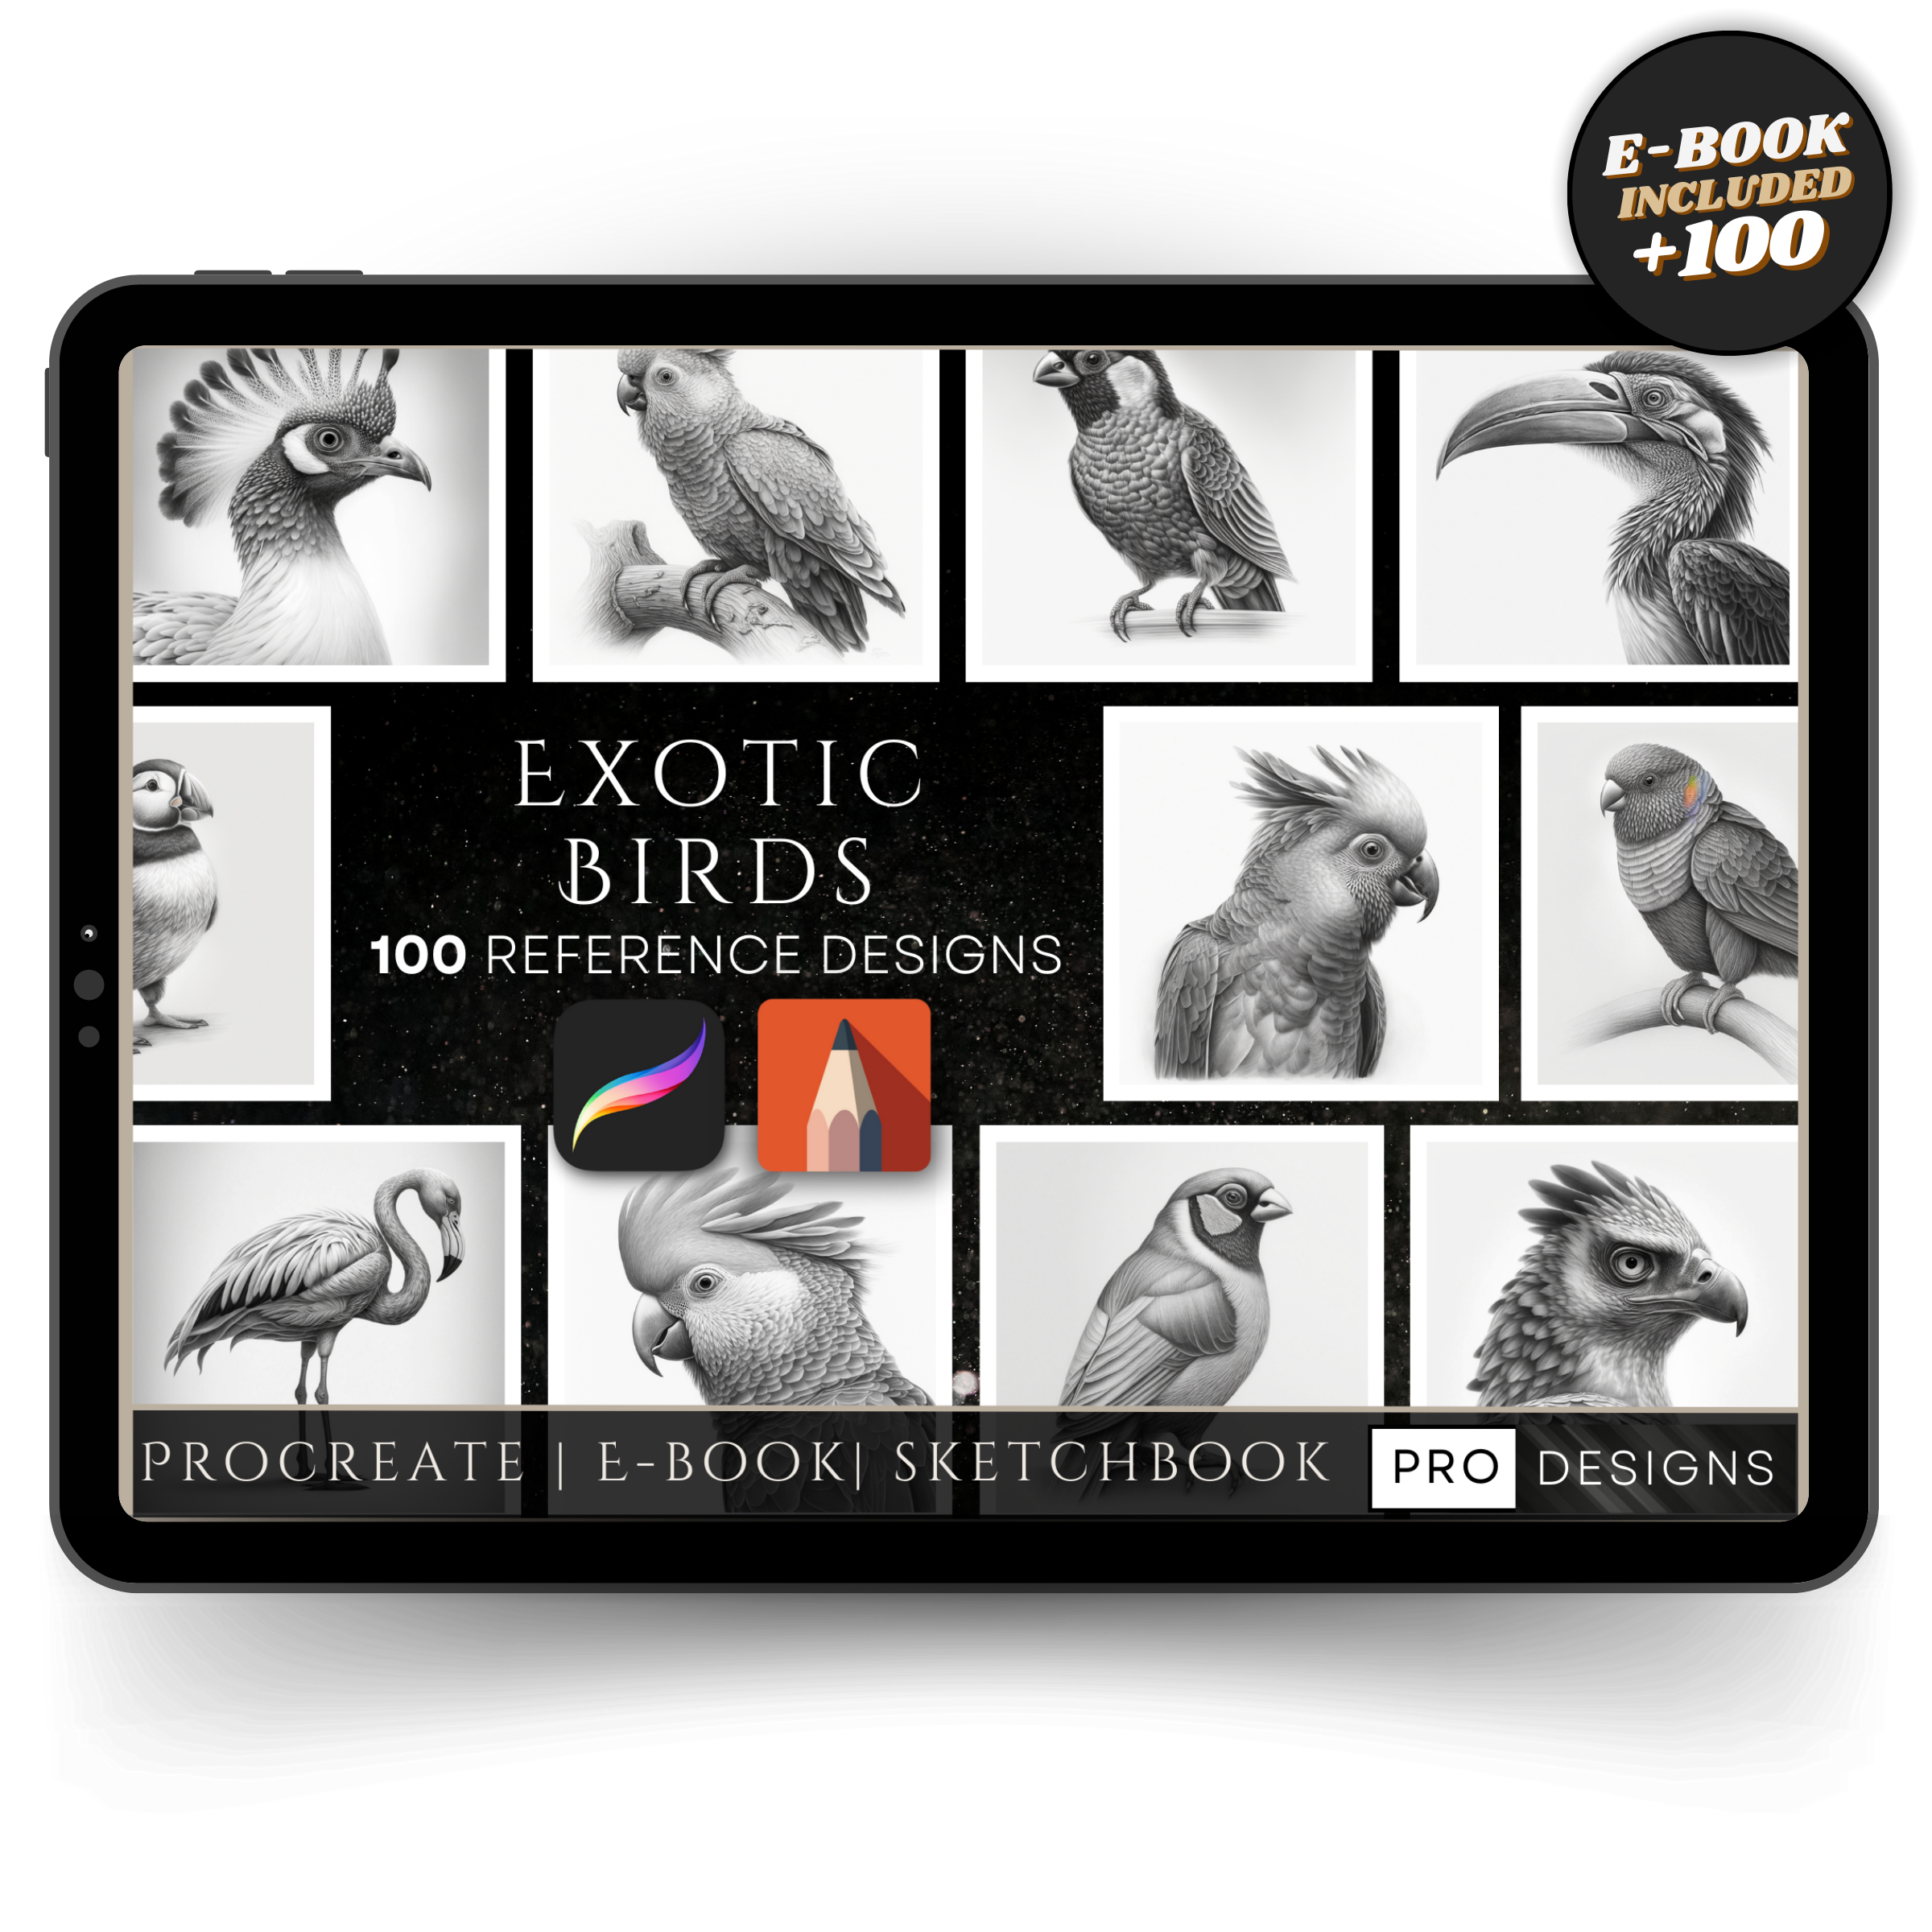 "Wings of Wonder" - The Exotic Birds Collection